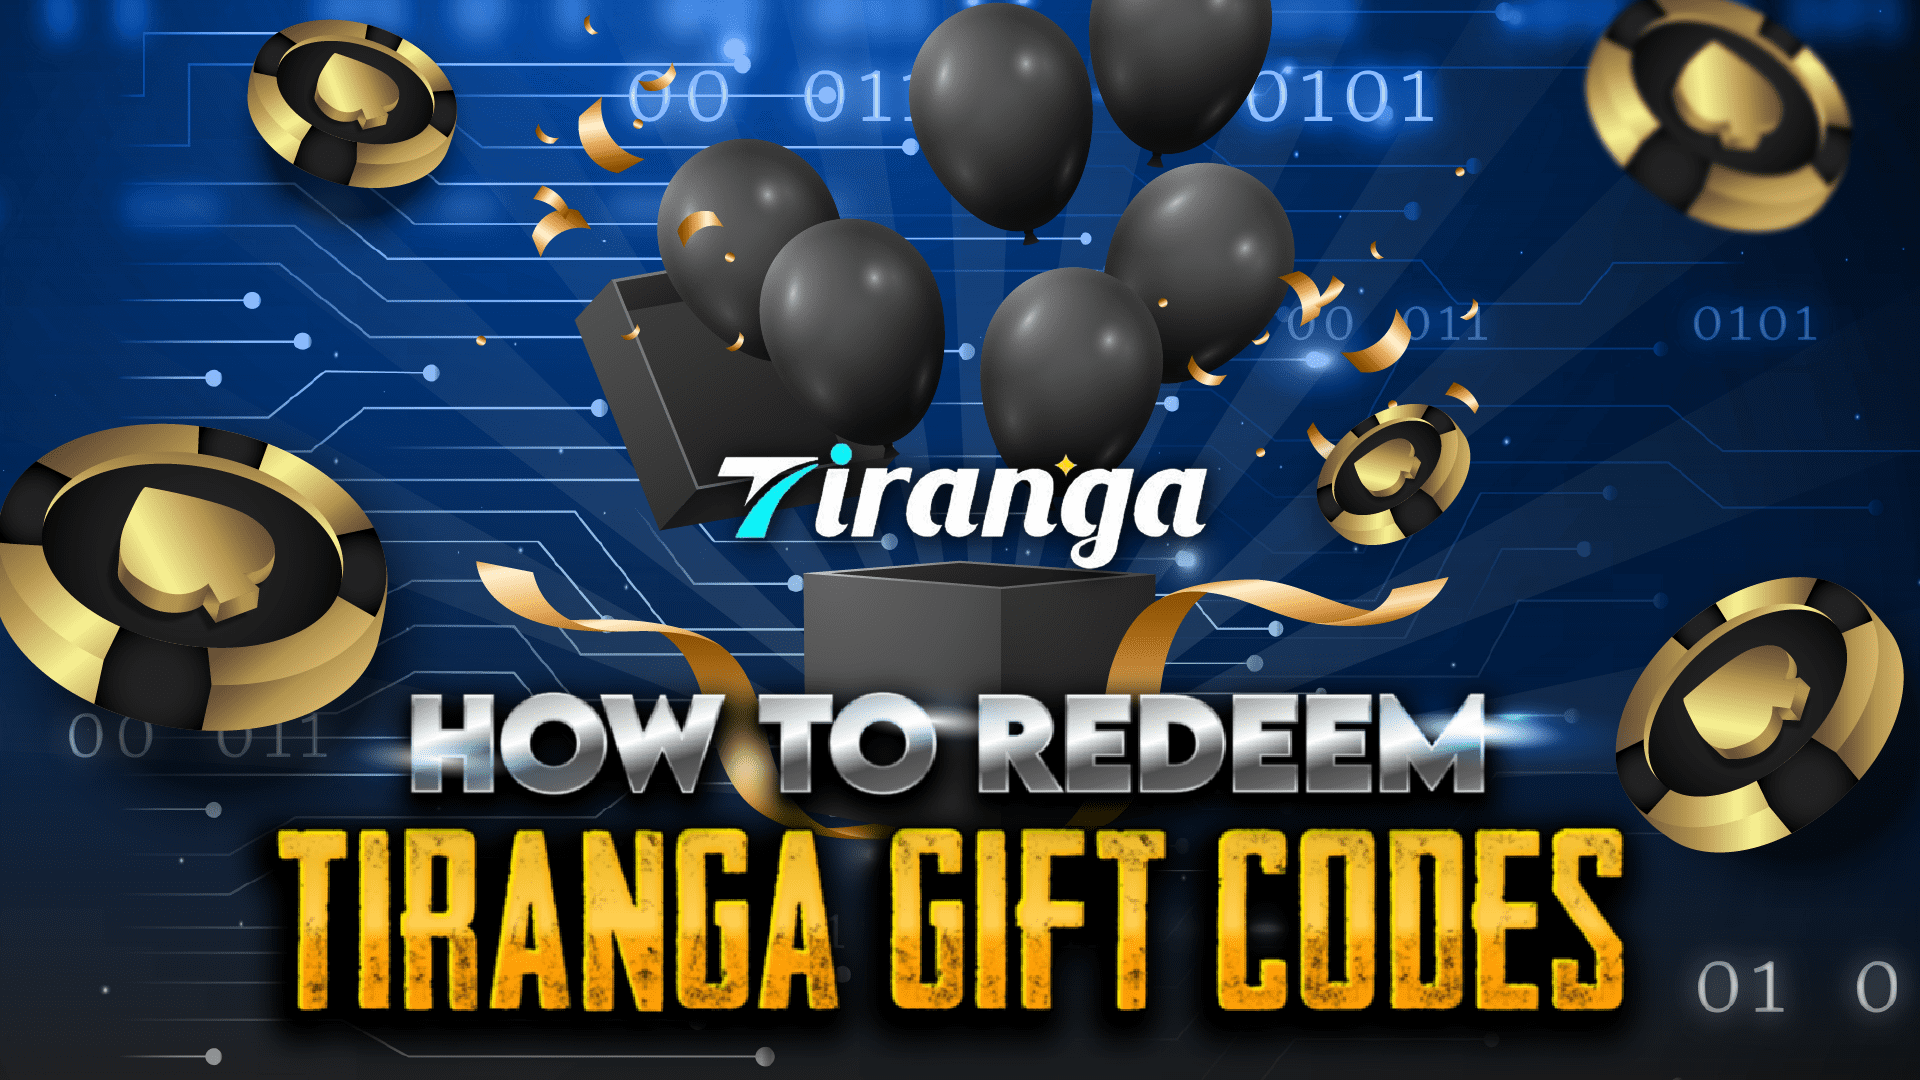 an image with a text that guide on how to redeem the tiranga gift codes in tiranga games